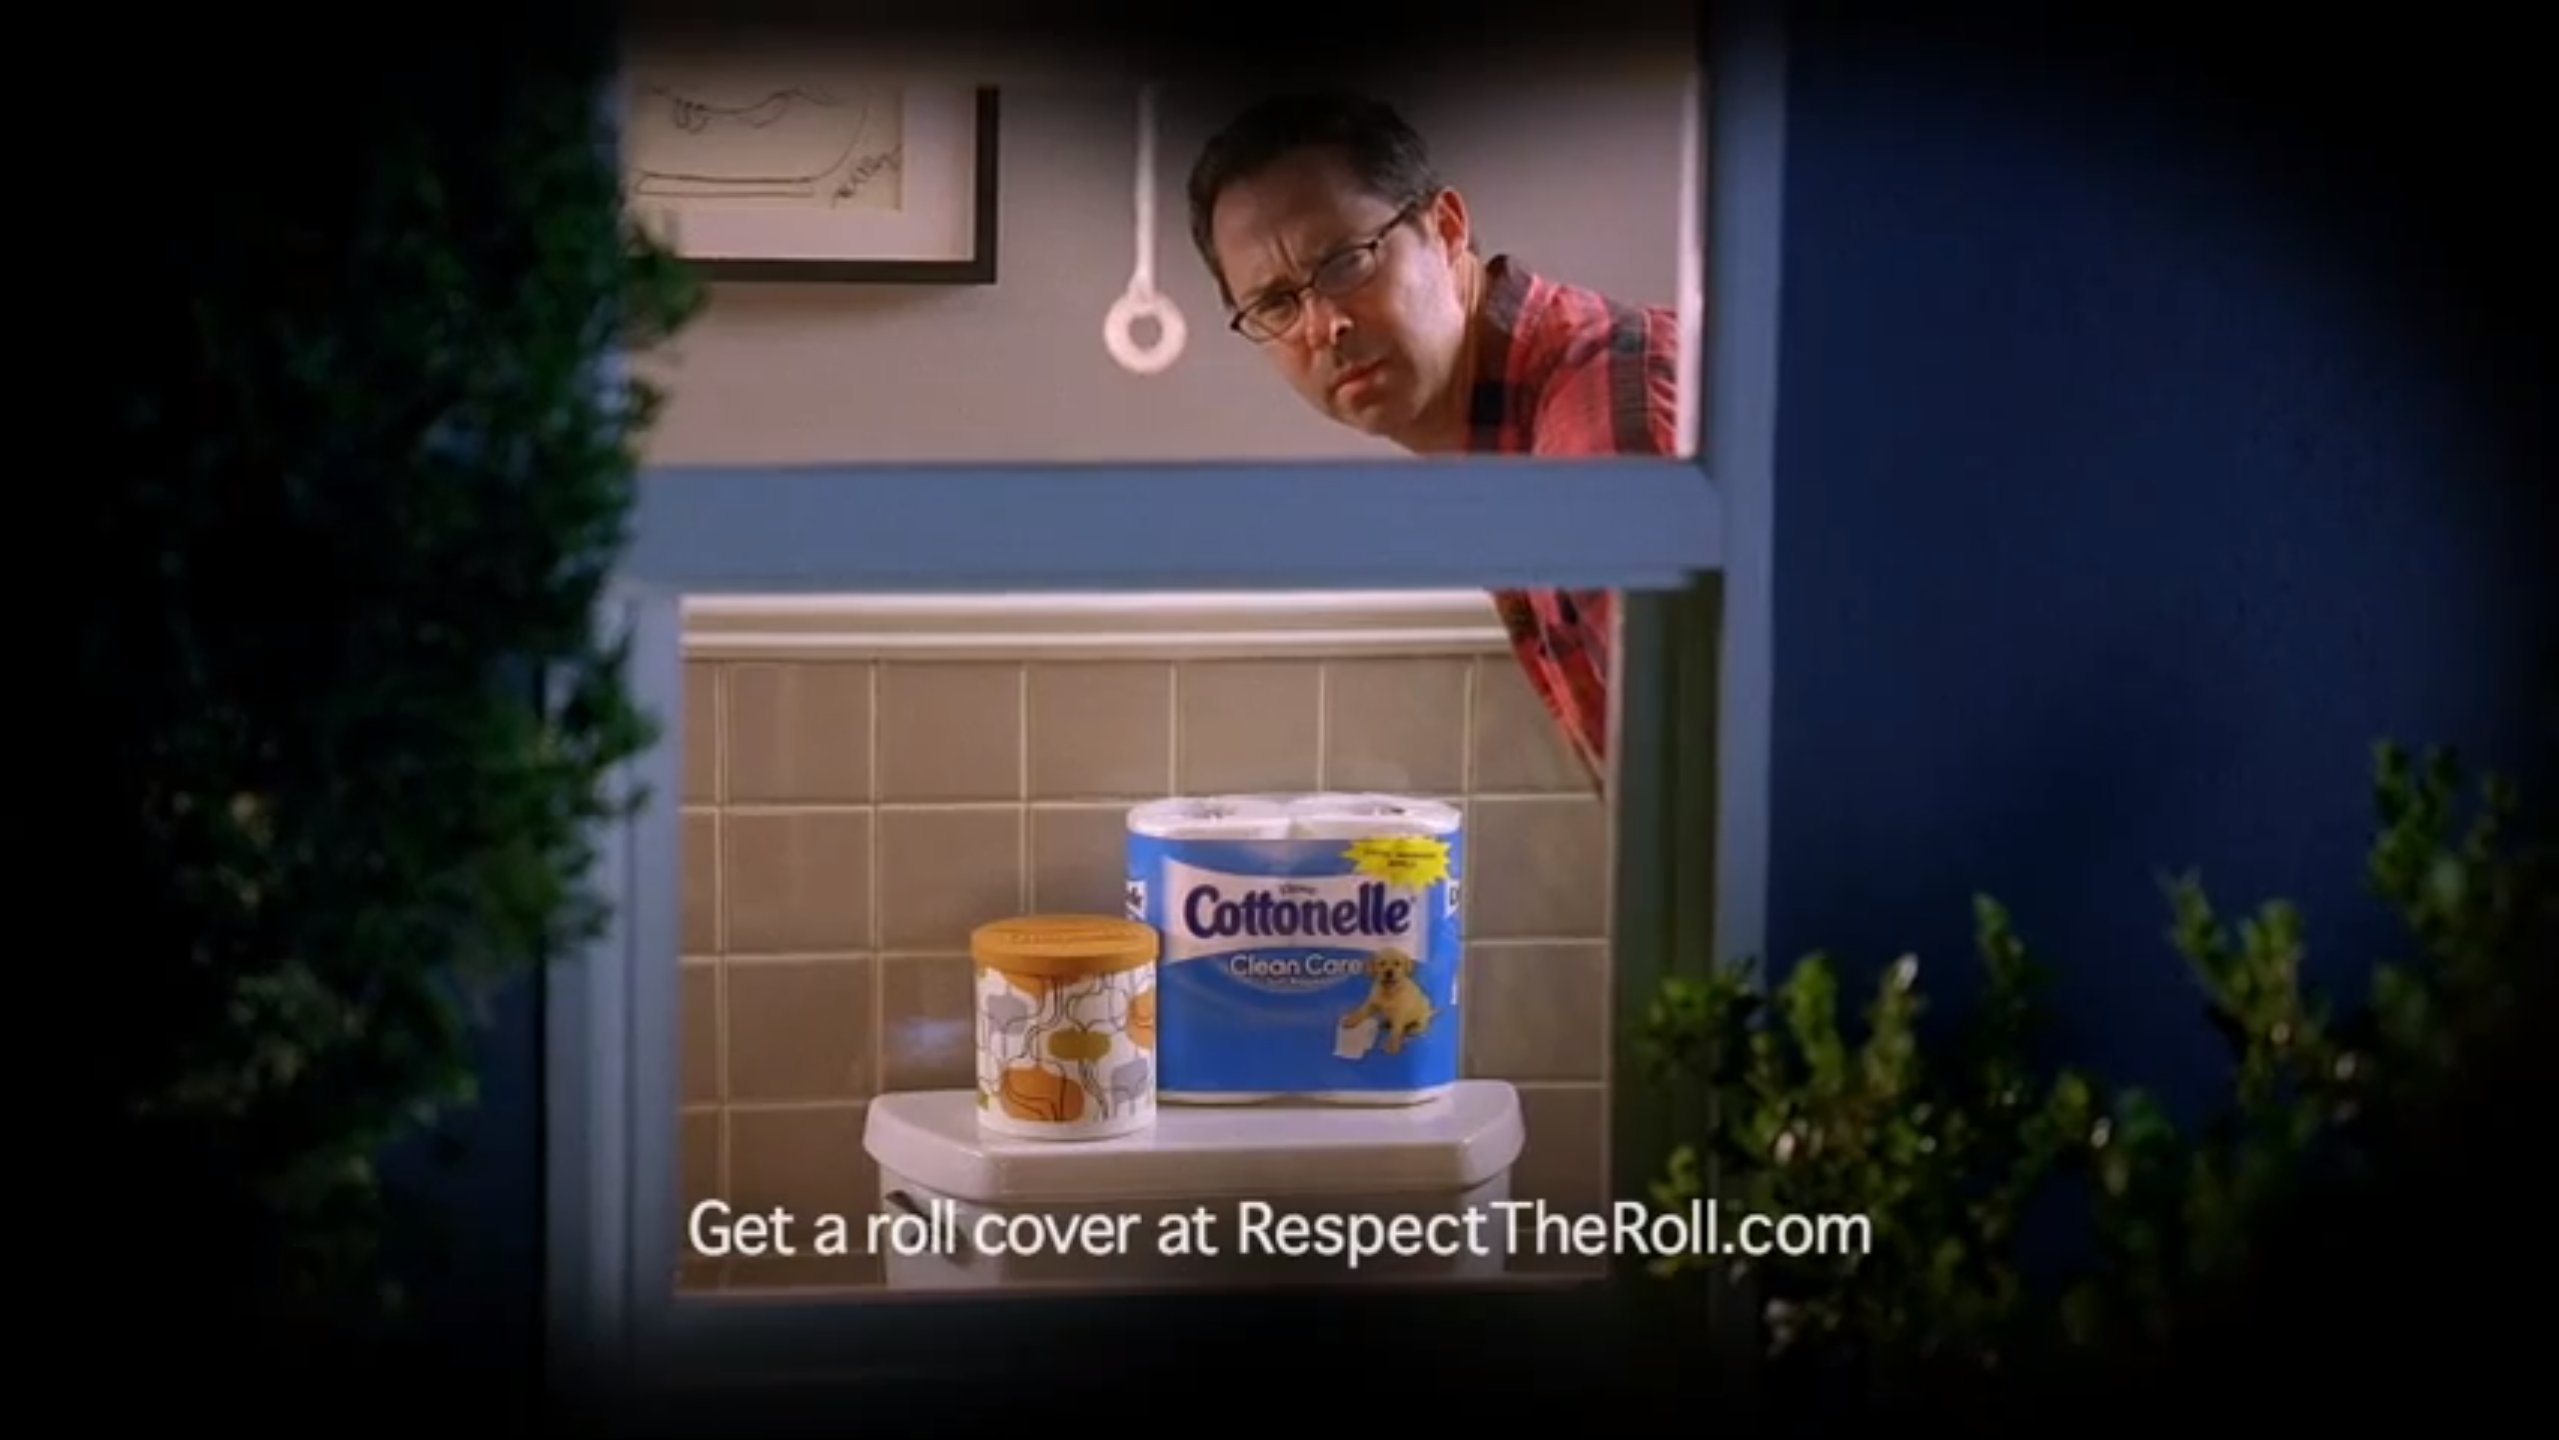 Screen cap from Cottonelle commercial.